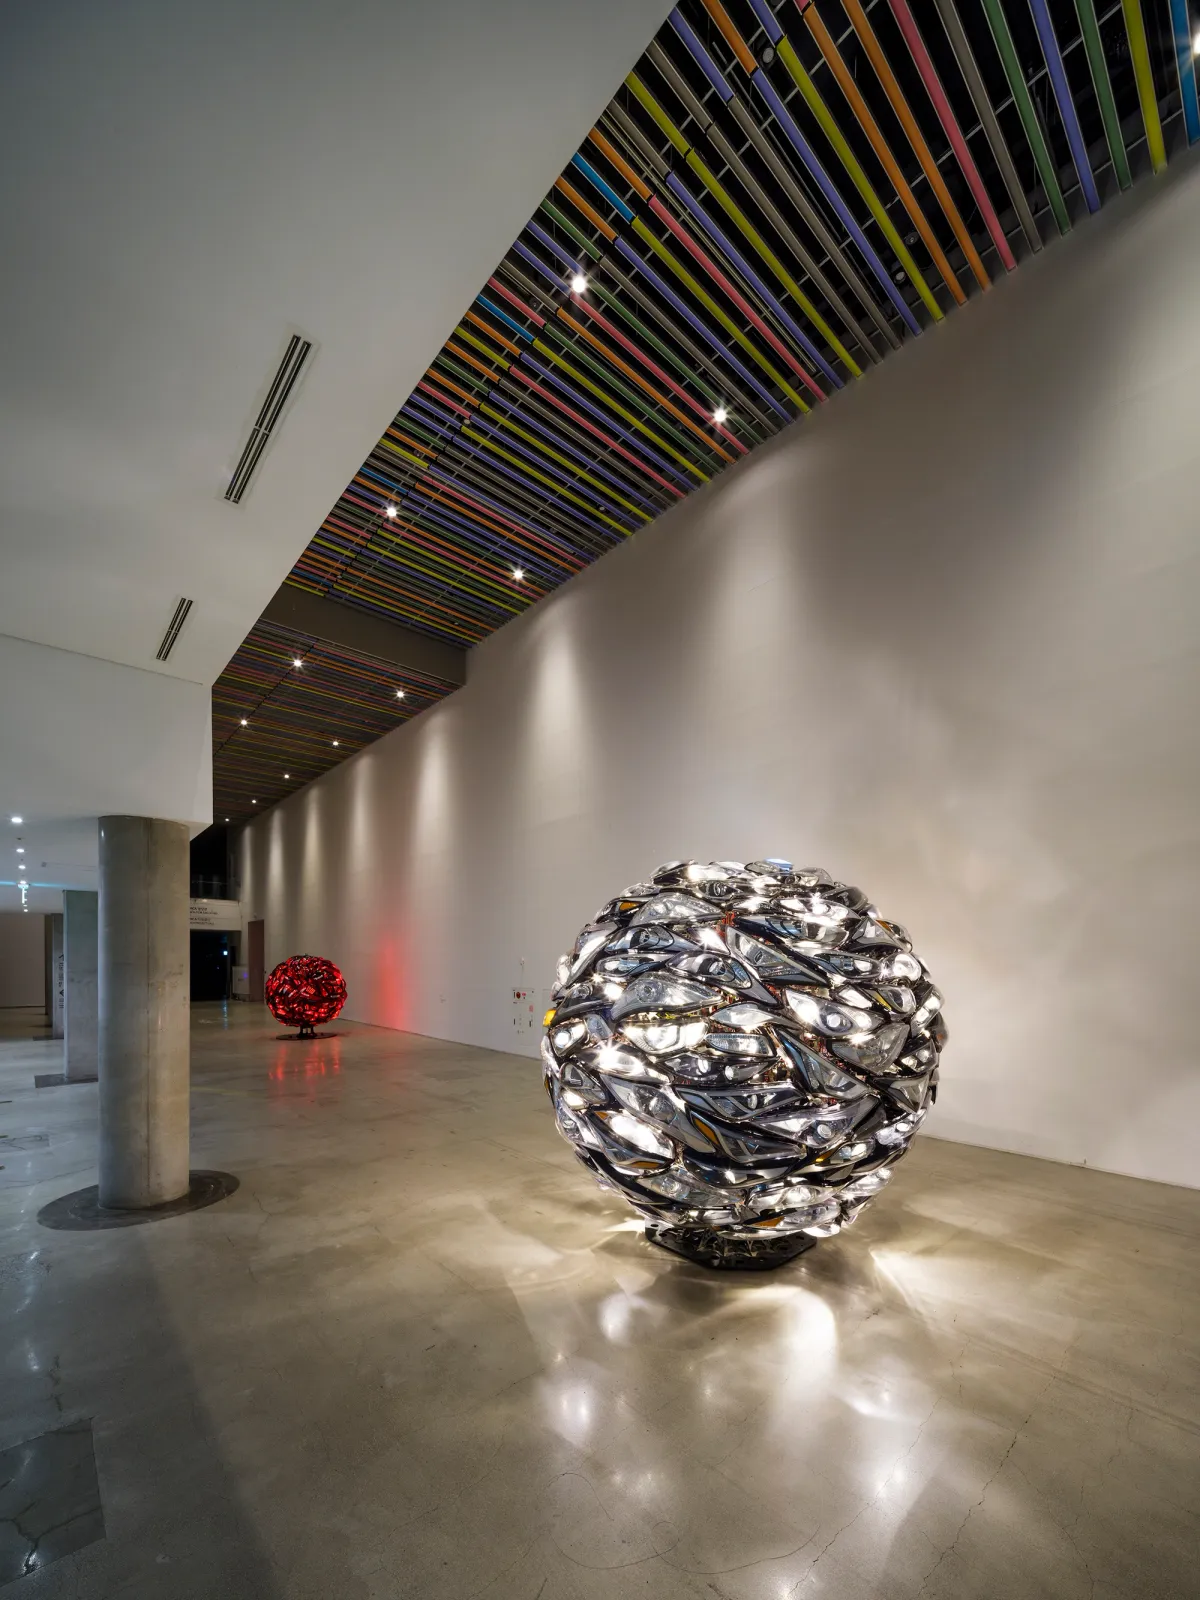 Two large, spherical metallic sculptures, one made of shiny red and silver materials and the other made of steel, dominate a spacious room. The sculptures reflect Hyundai Motor's headlights and tail lights.